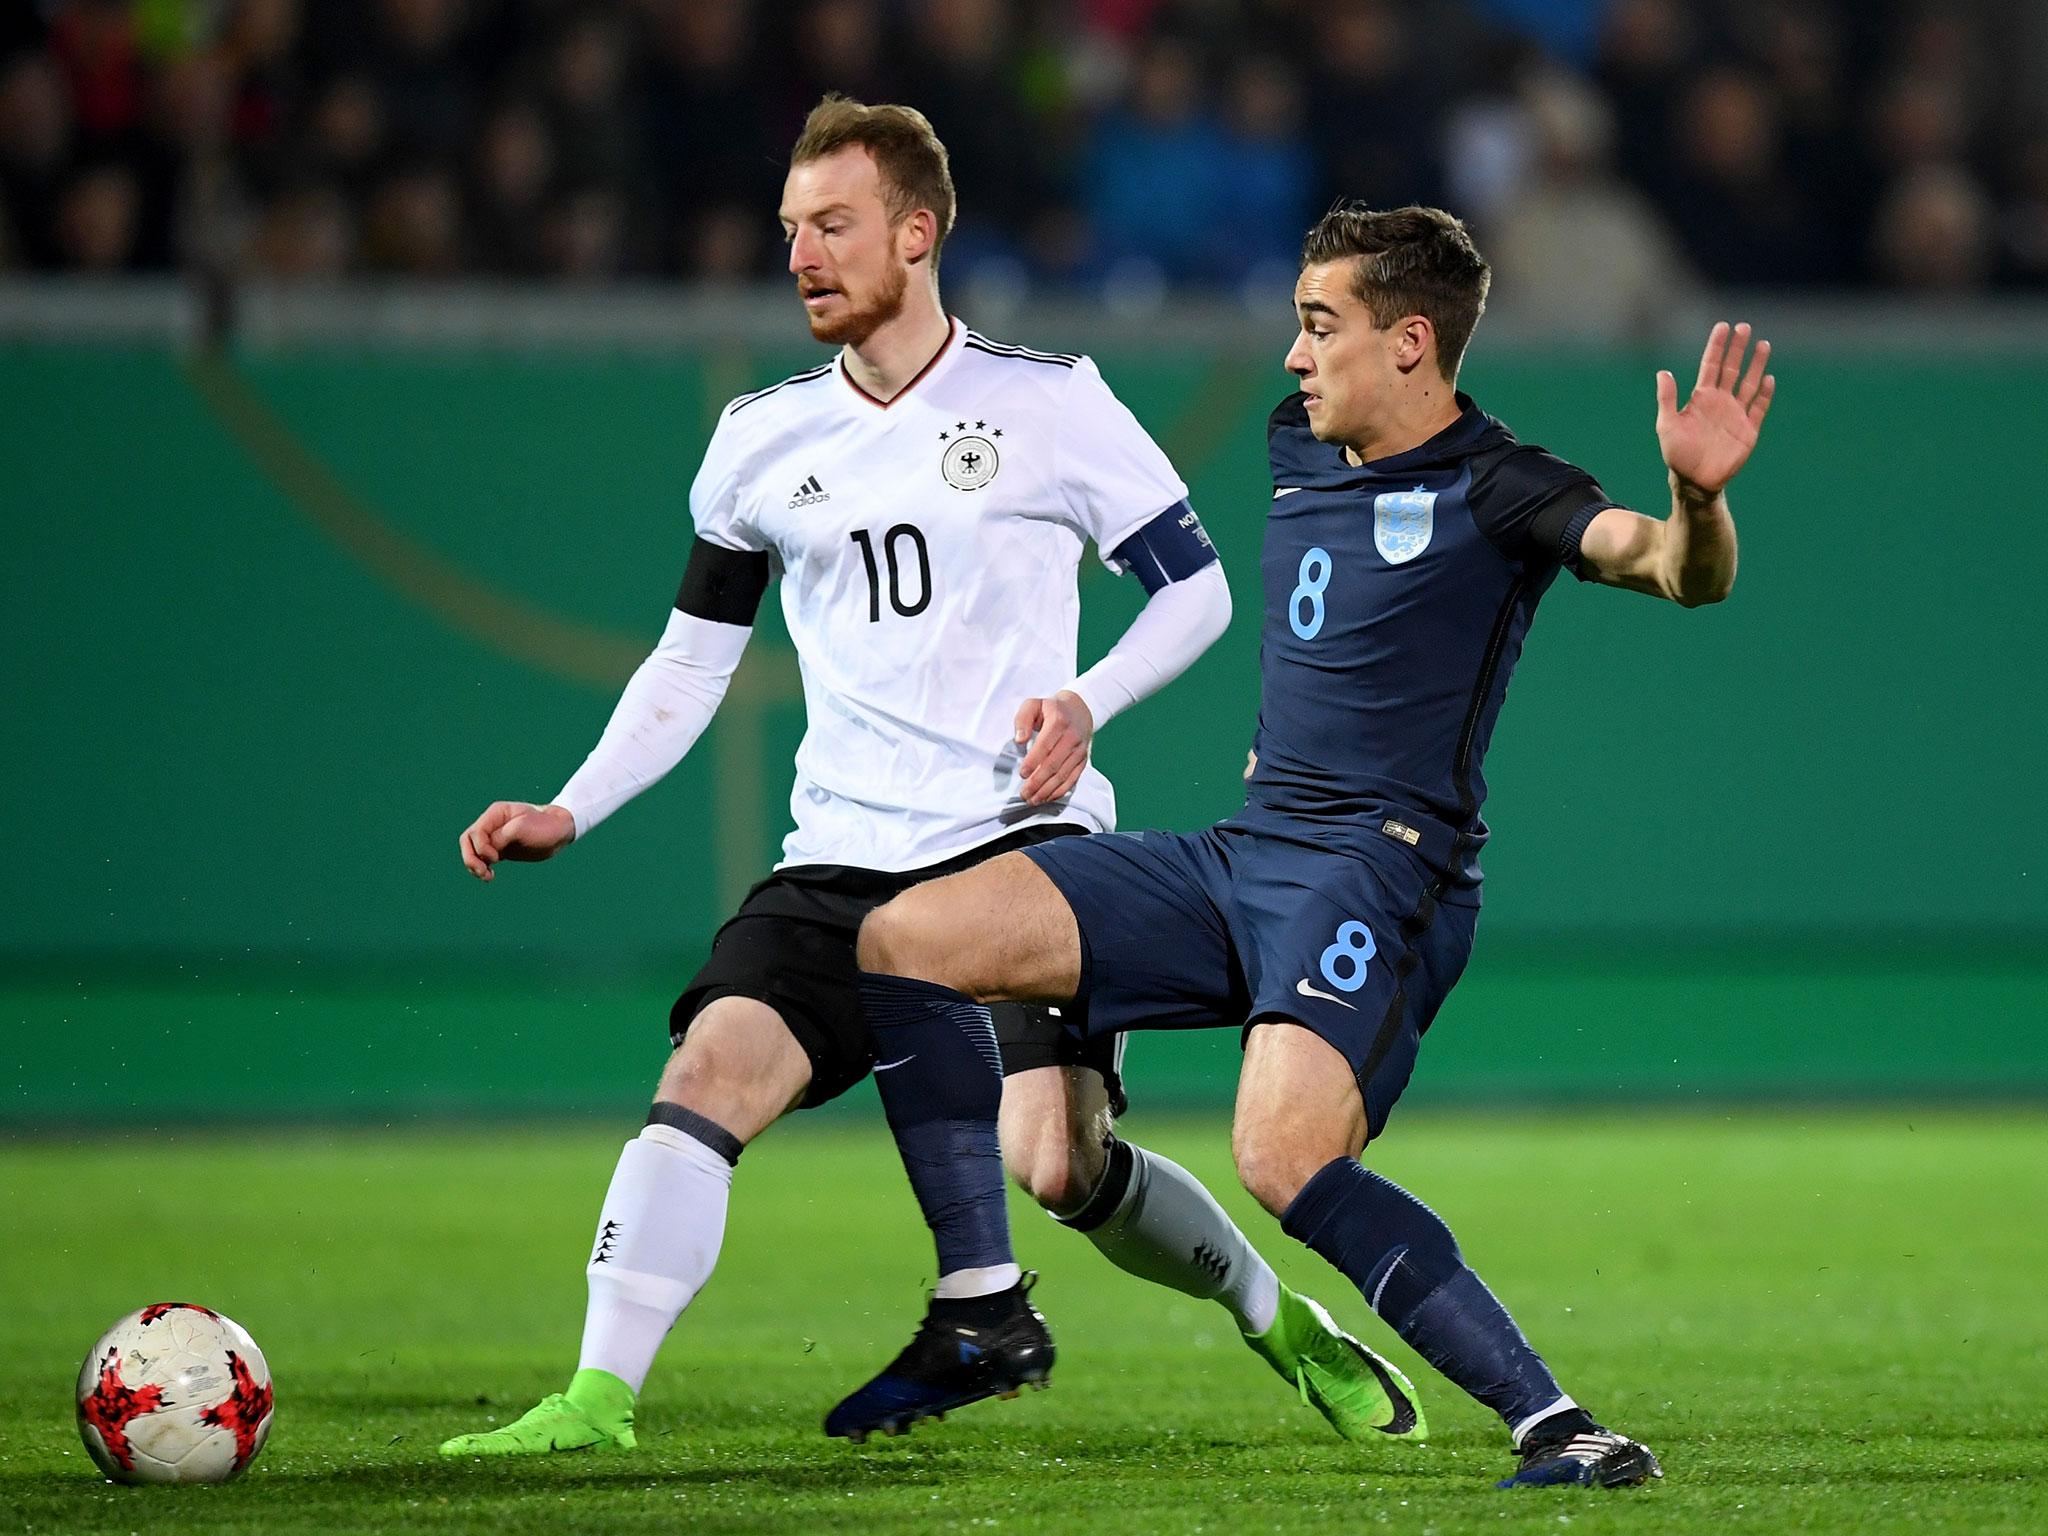 Harry Winks can see a path to the senior England side with Gareth Southgate in charge